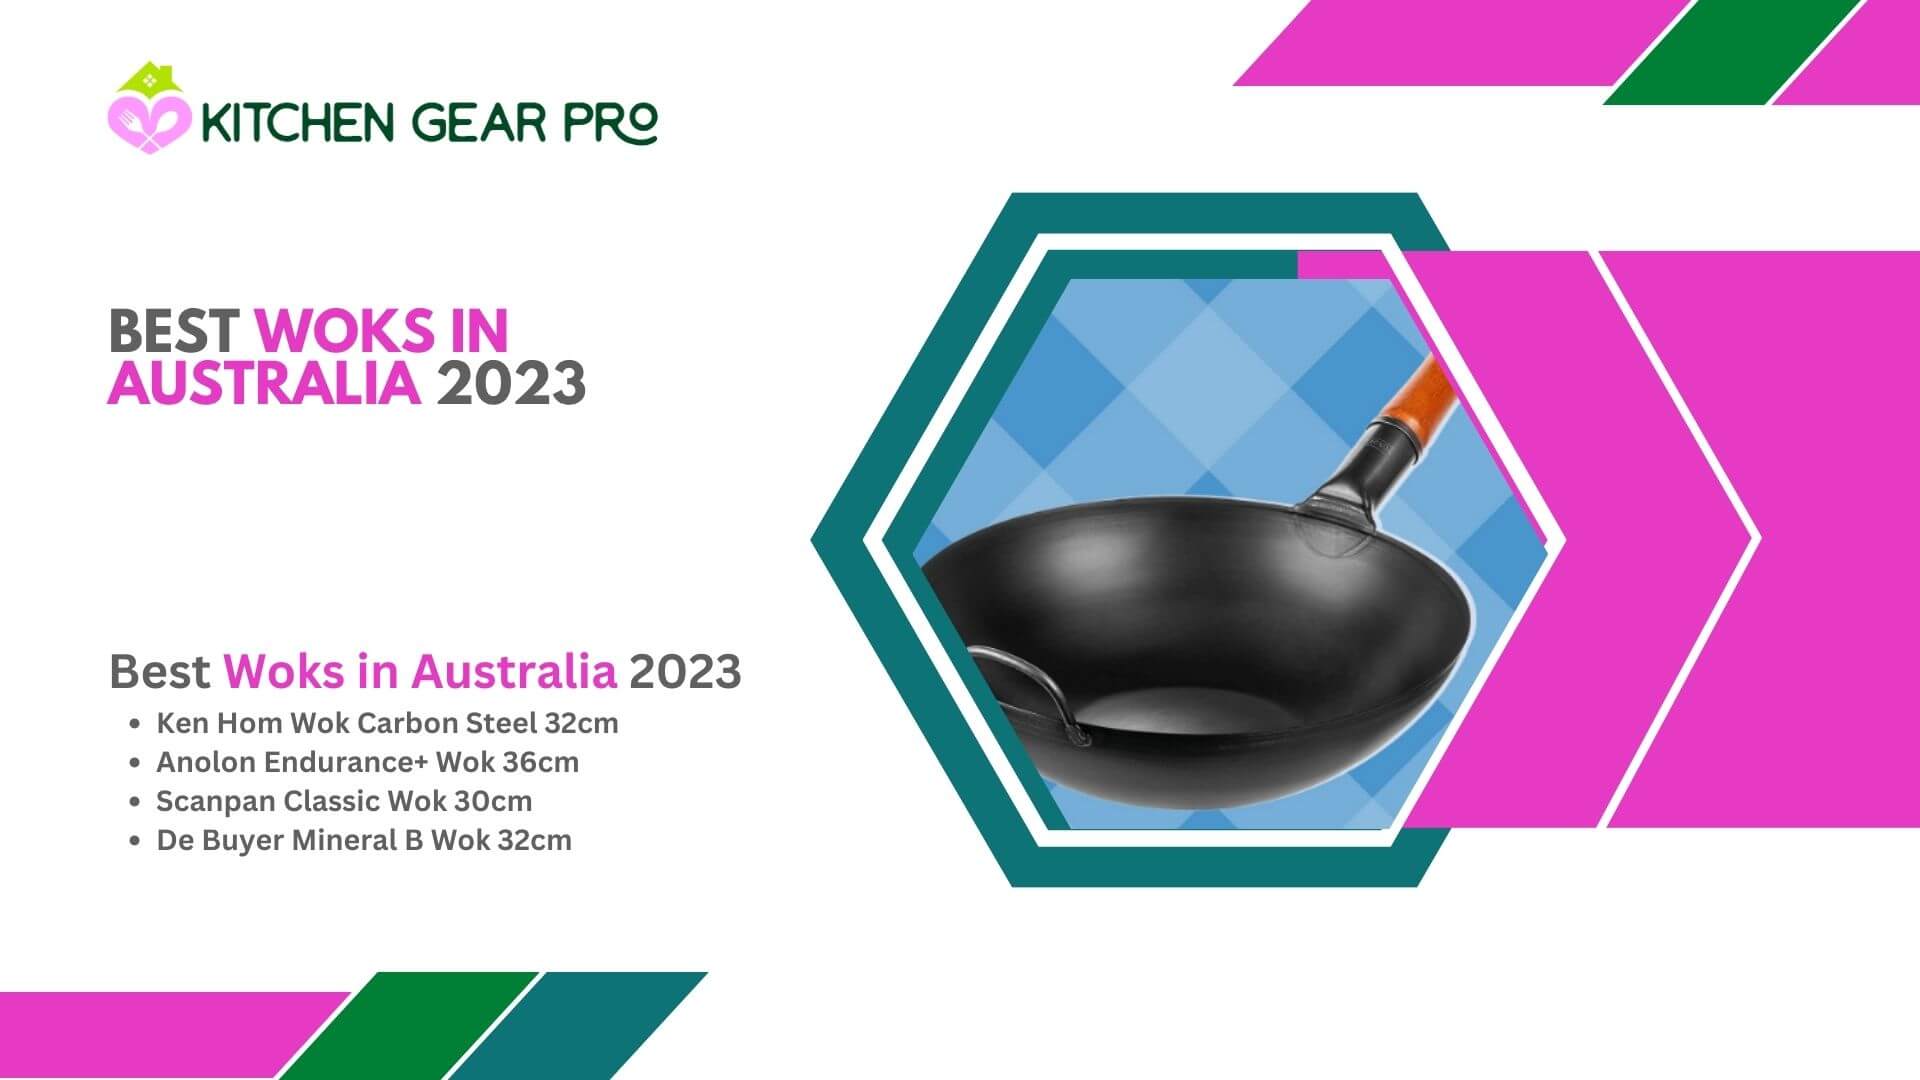 Best Woks in Australia 2023 - Everything You Need TO Know